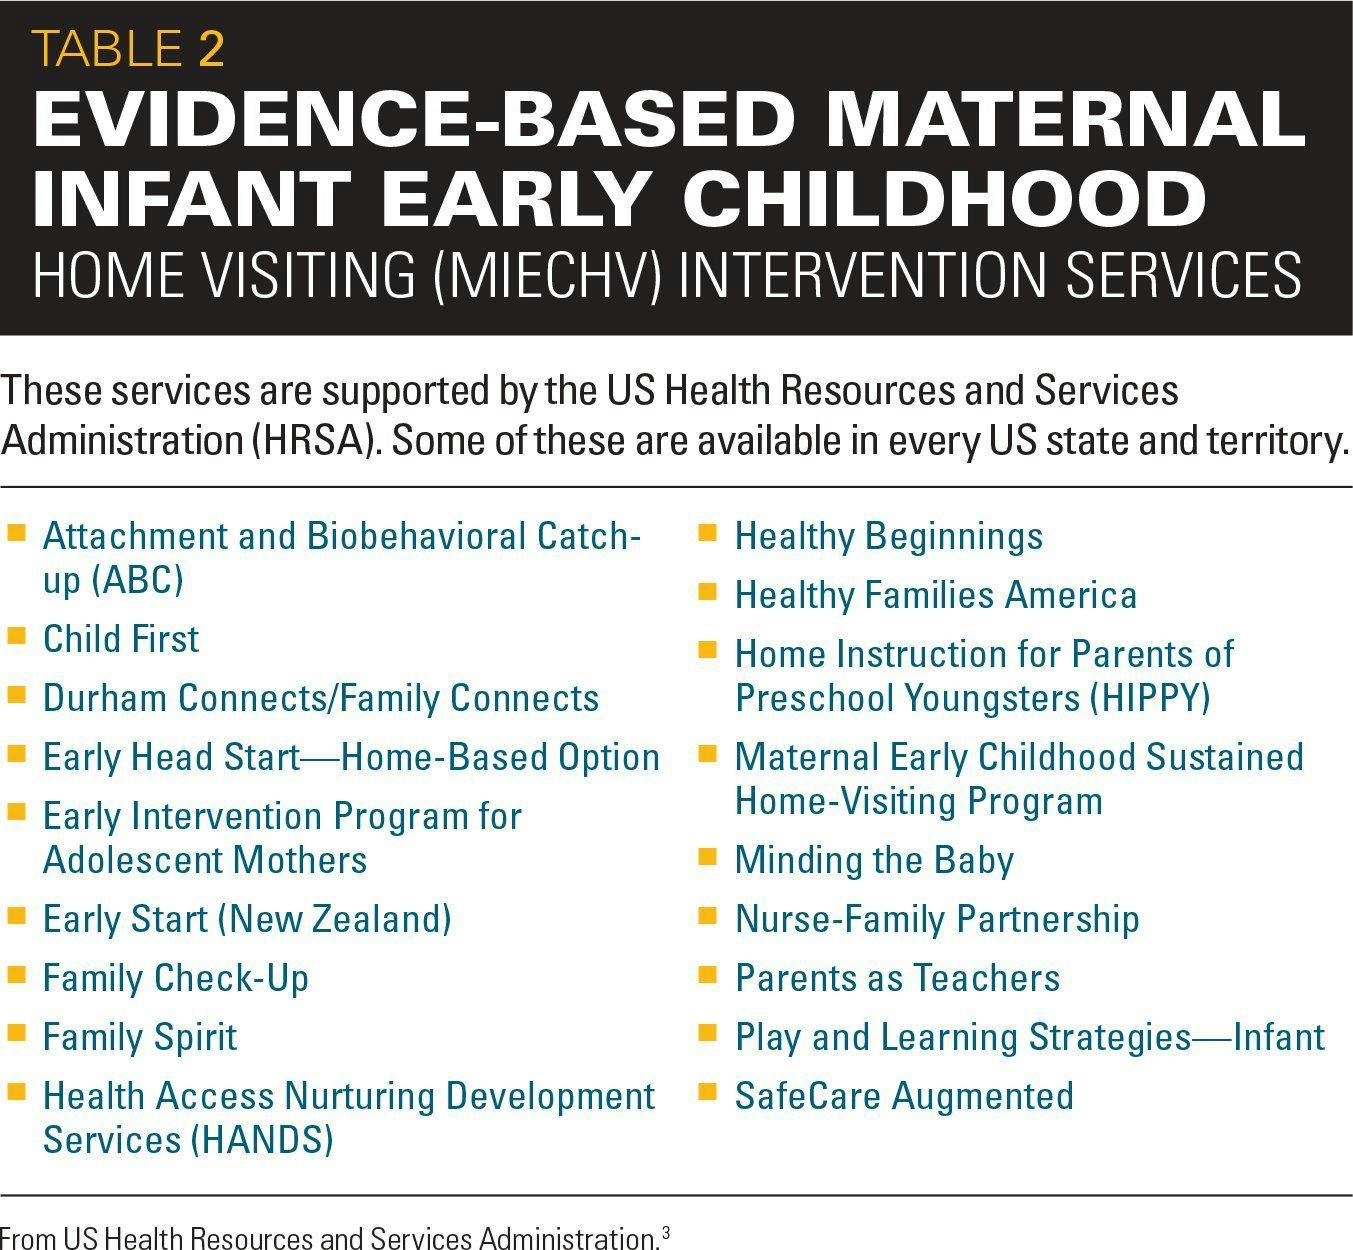 Evidence-based maternal/infant early childhood home visiting intervention services